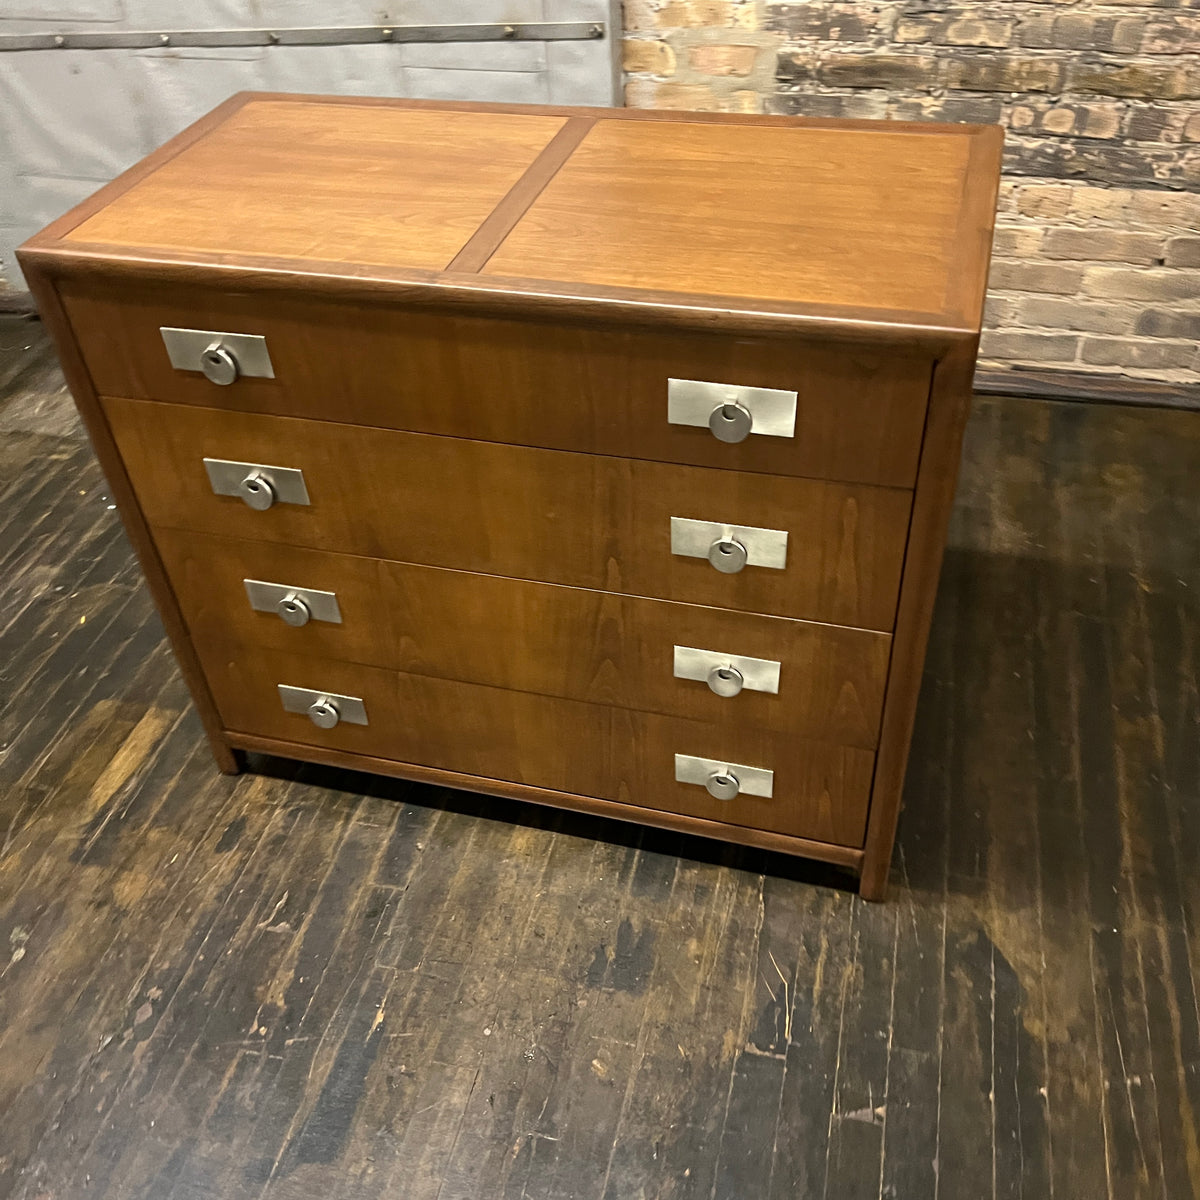 Asian influenced chest, designed by Michael Taylor for the "New World" collection for Baker, circa 1960s.  Chicago, IL